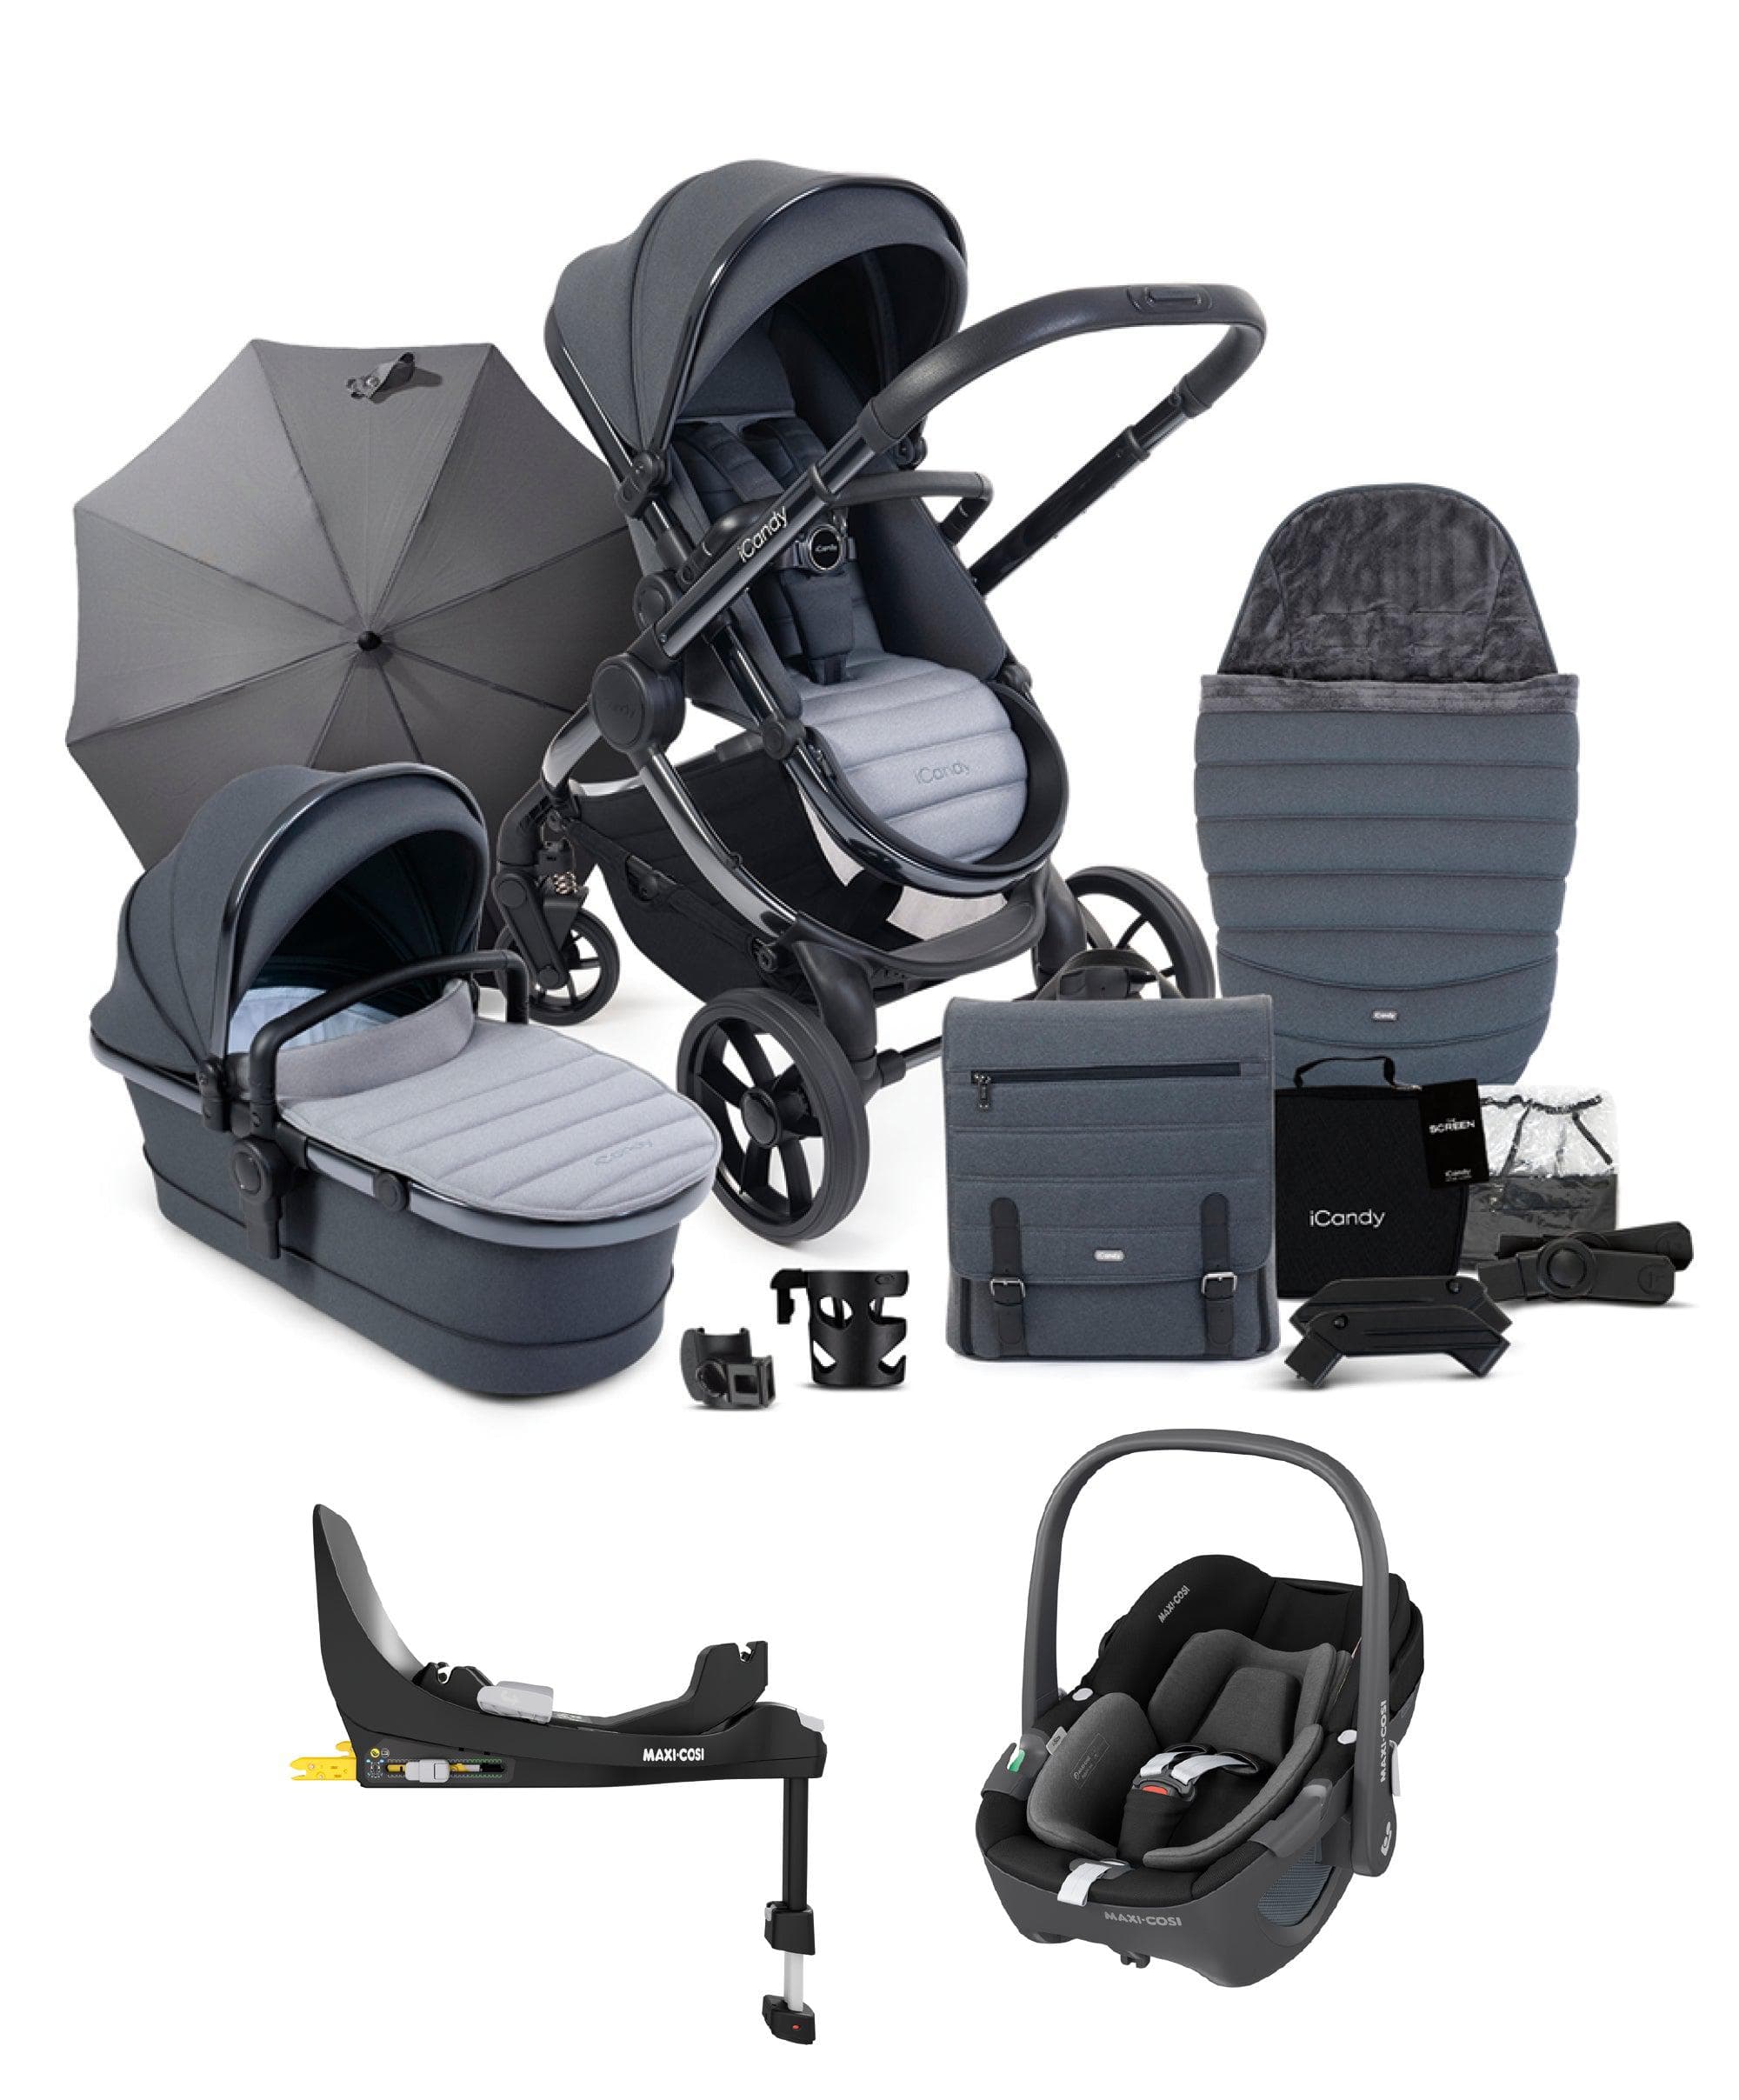 iCandy Peach 7 Complete Pushchair Bundle with Maxi-Cosi Pebble 360 Car Seat & Base - Truffle